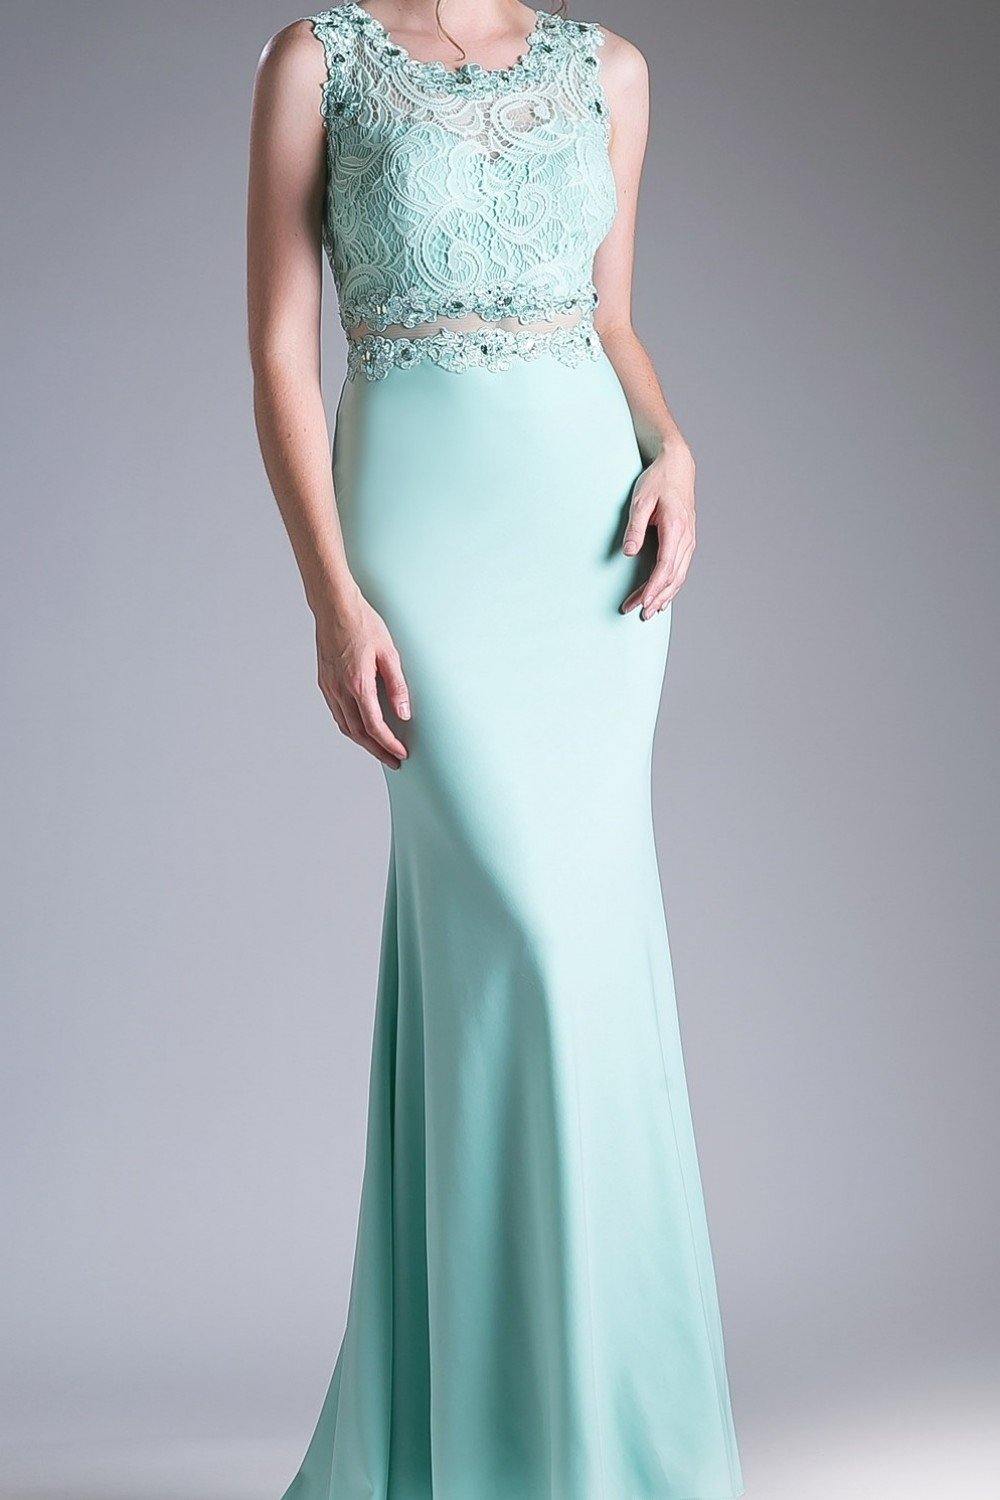 Formal Fitted Long Dress Evening Gown - The Dress Outlet Cinderella Divine